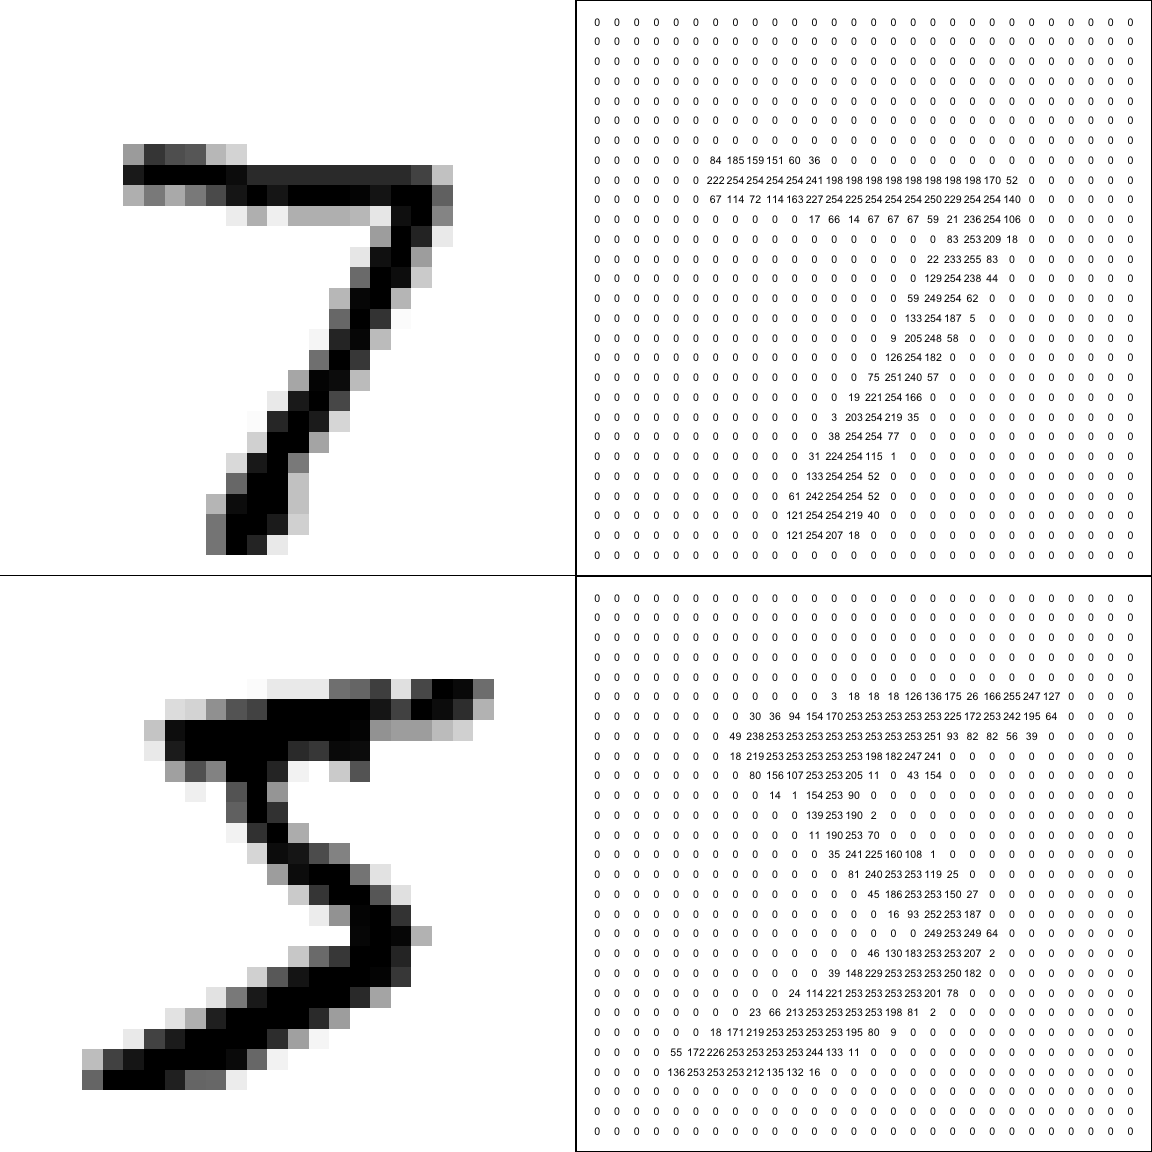 Top row: the first test image and its numerical representation $\tilde{\mathbf x}_1$. Bottom row: the first image in the training data set and its numerical representation $\mathbf x_1$. To compute the similarity between the images, we square the differences between the numbers at the same corresponding positions in the right hand column, and sum.